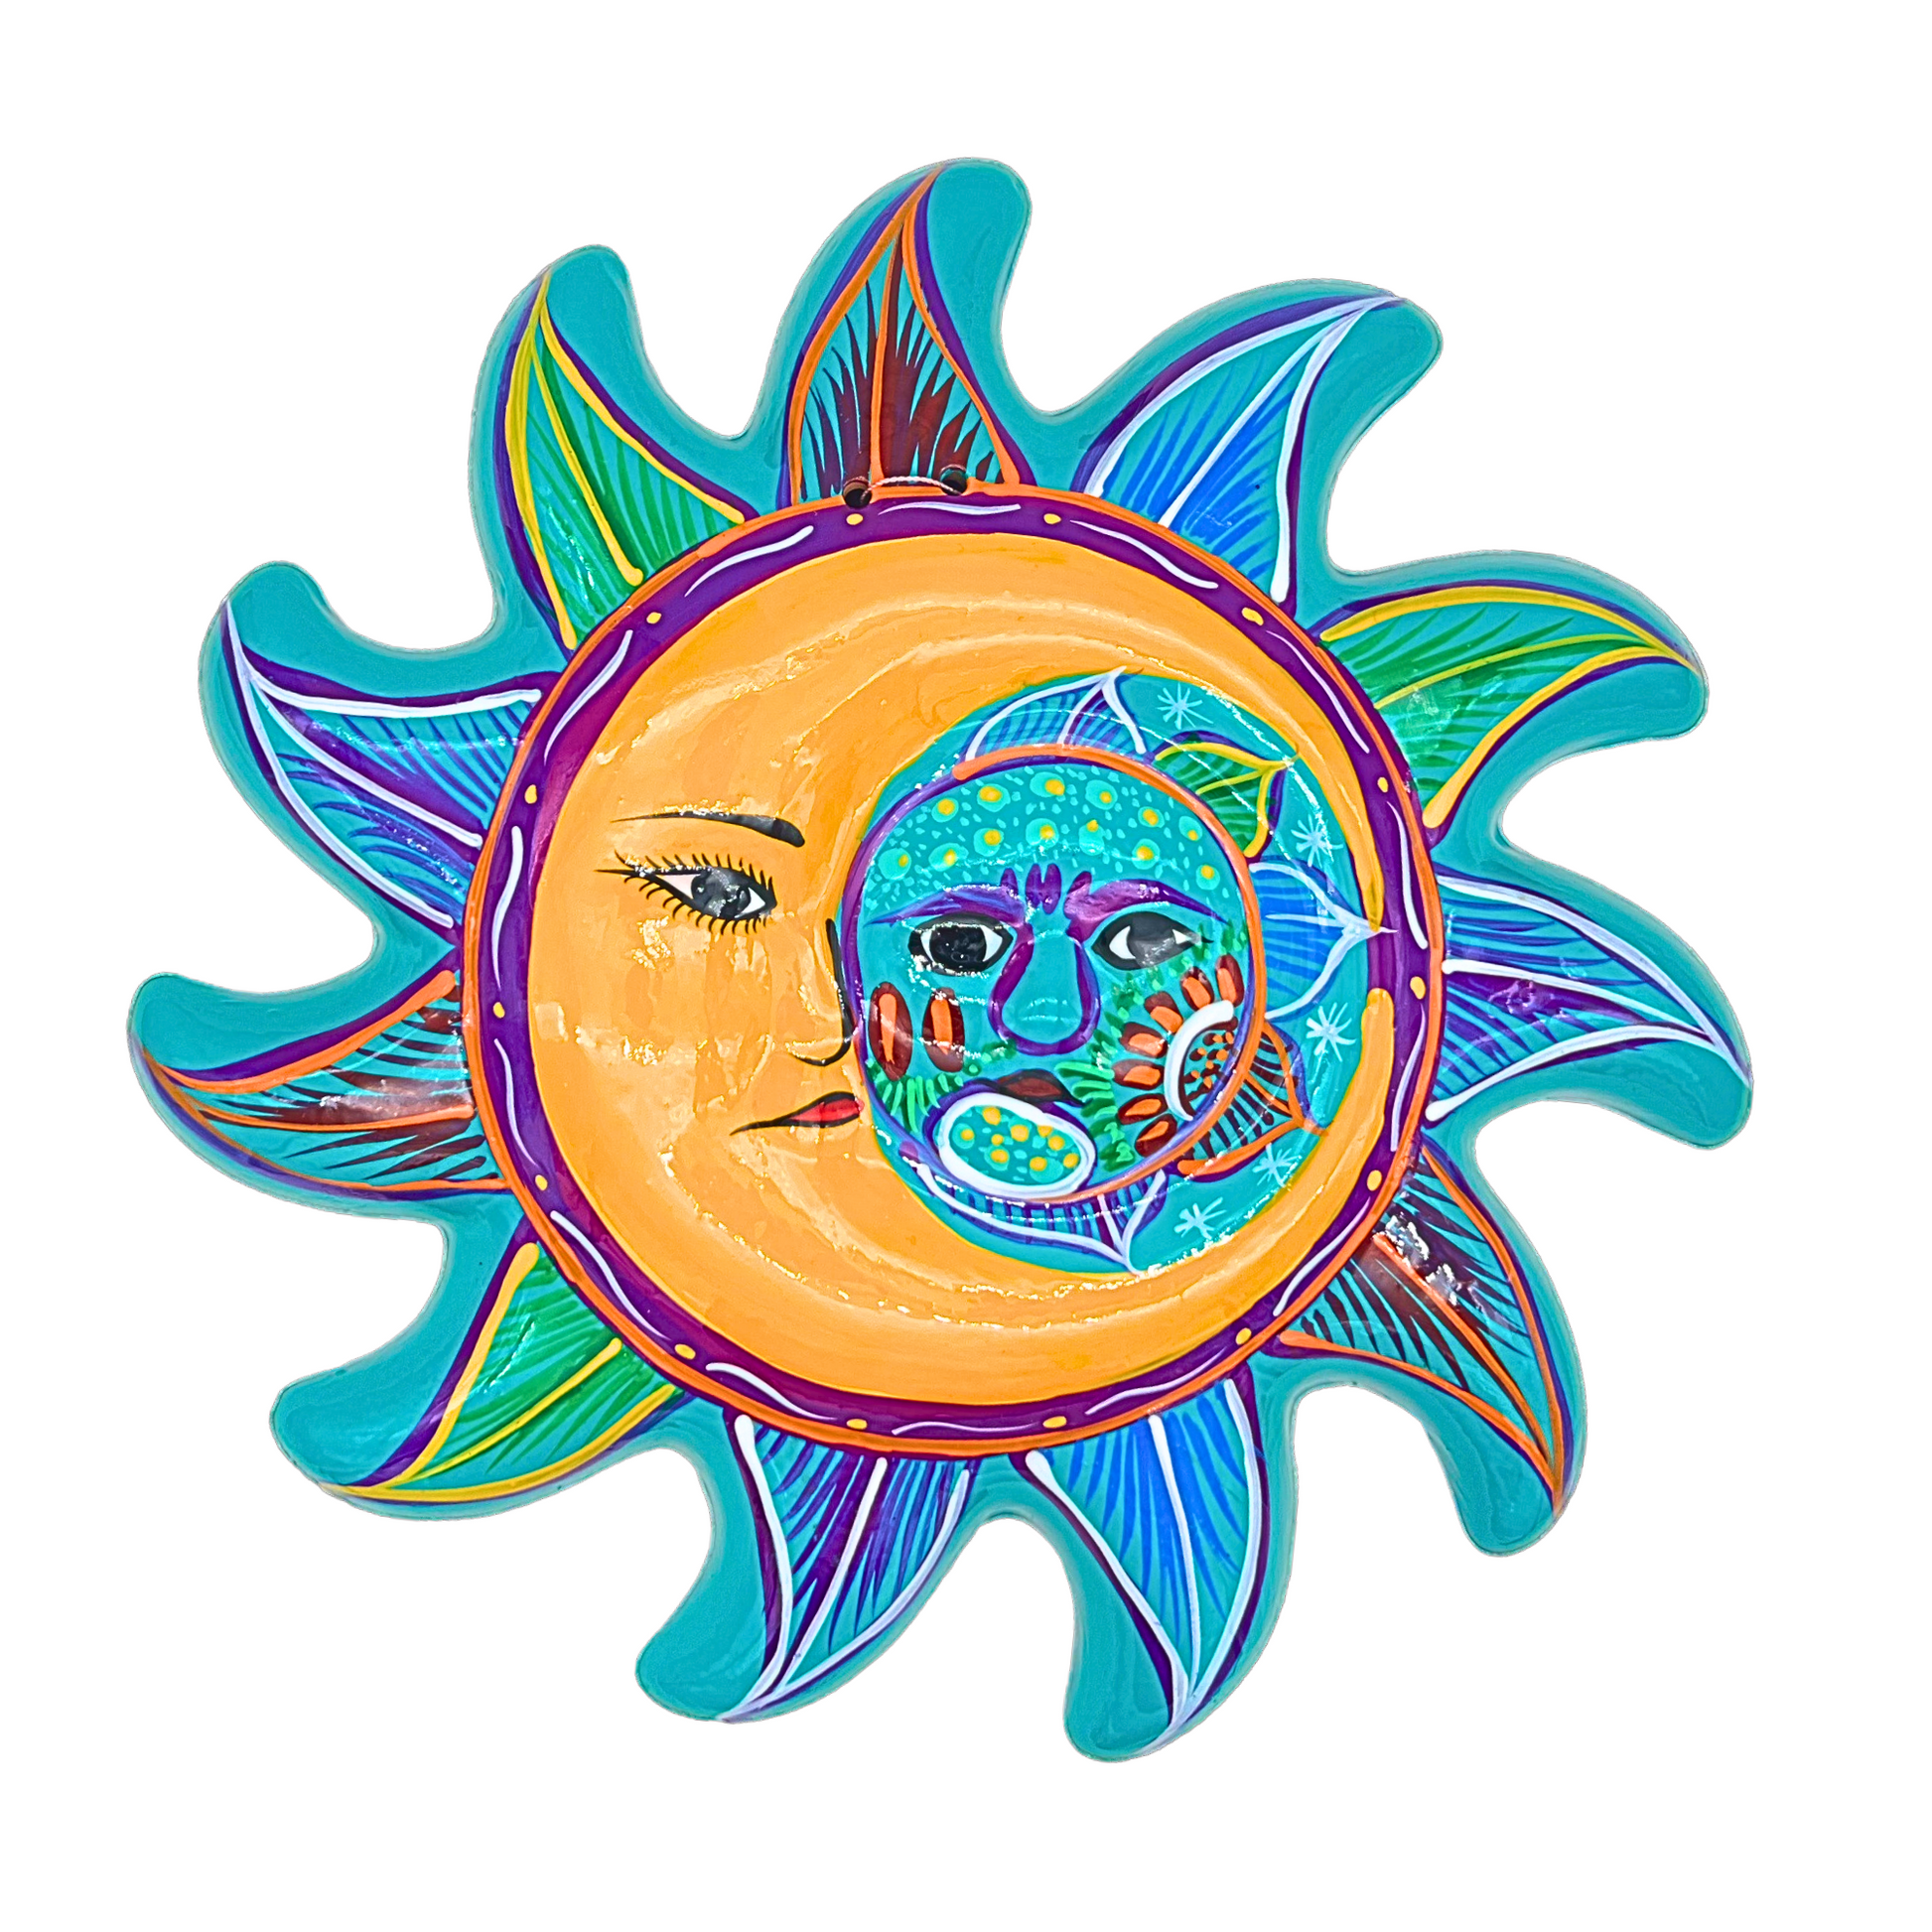 Ceramic Talavera sun and moon eclipse wall decor, hand-painted by Mexican artisans, multicolored, 10 inches in diameter.